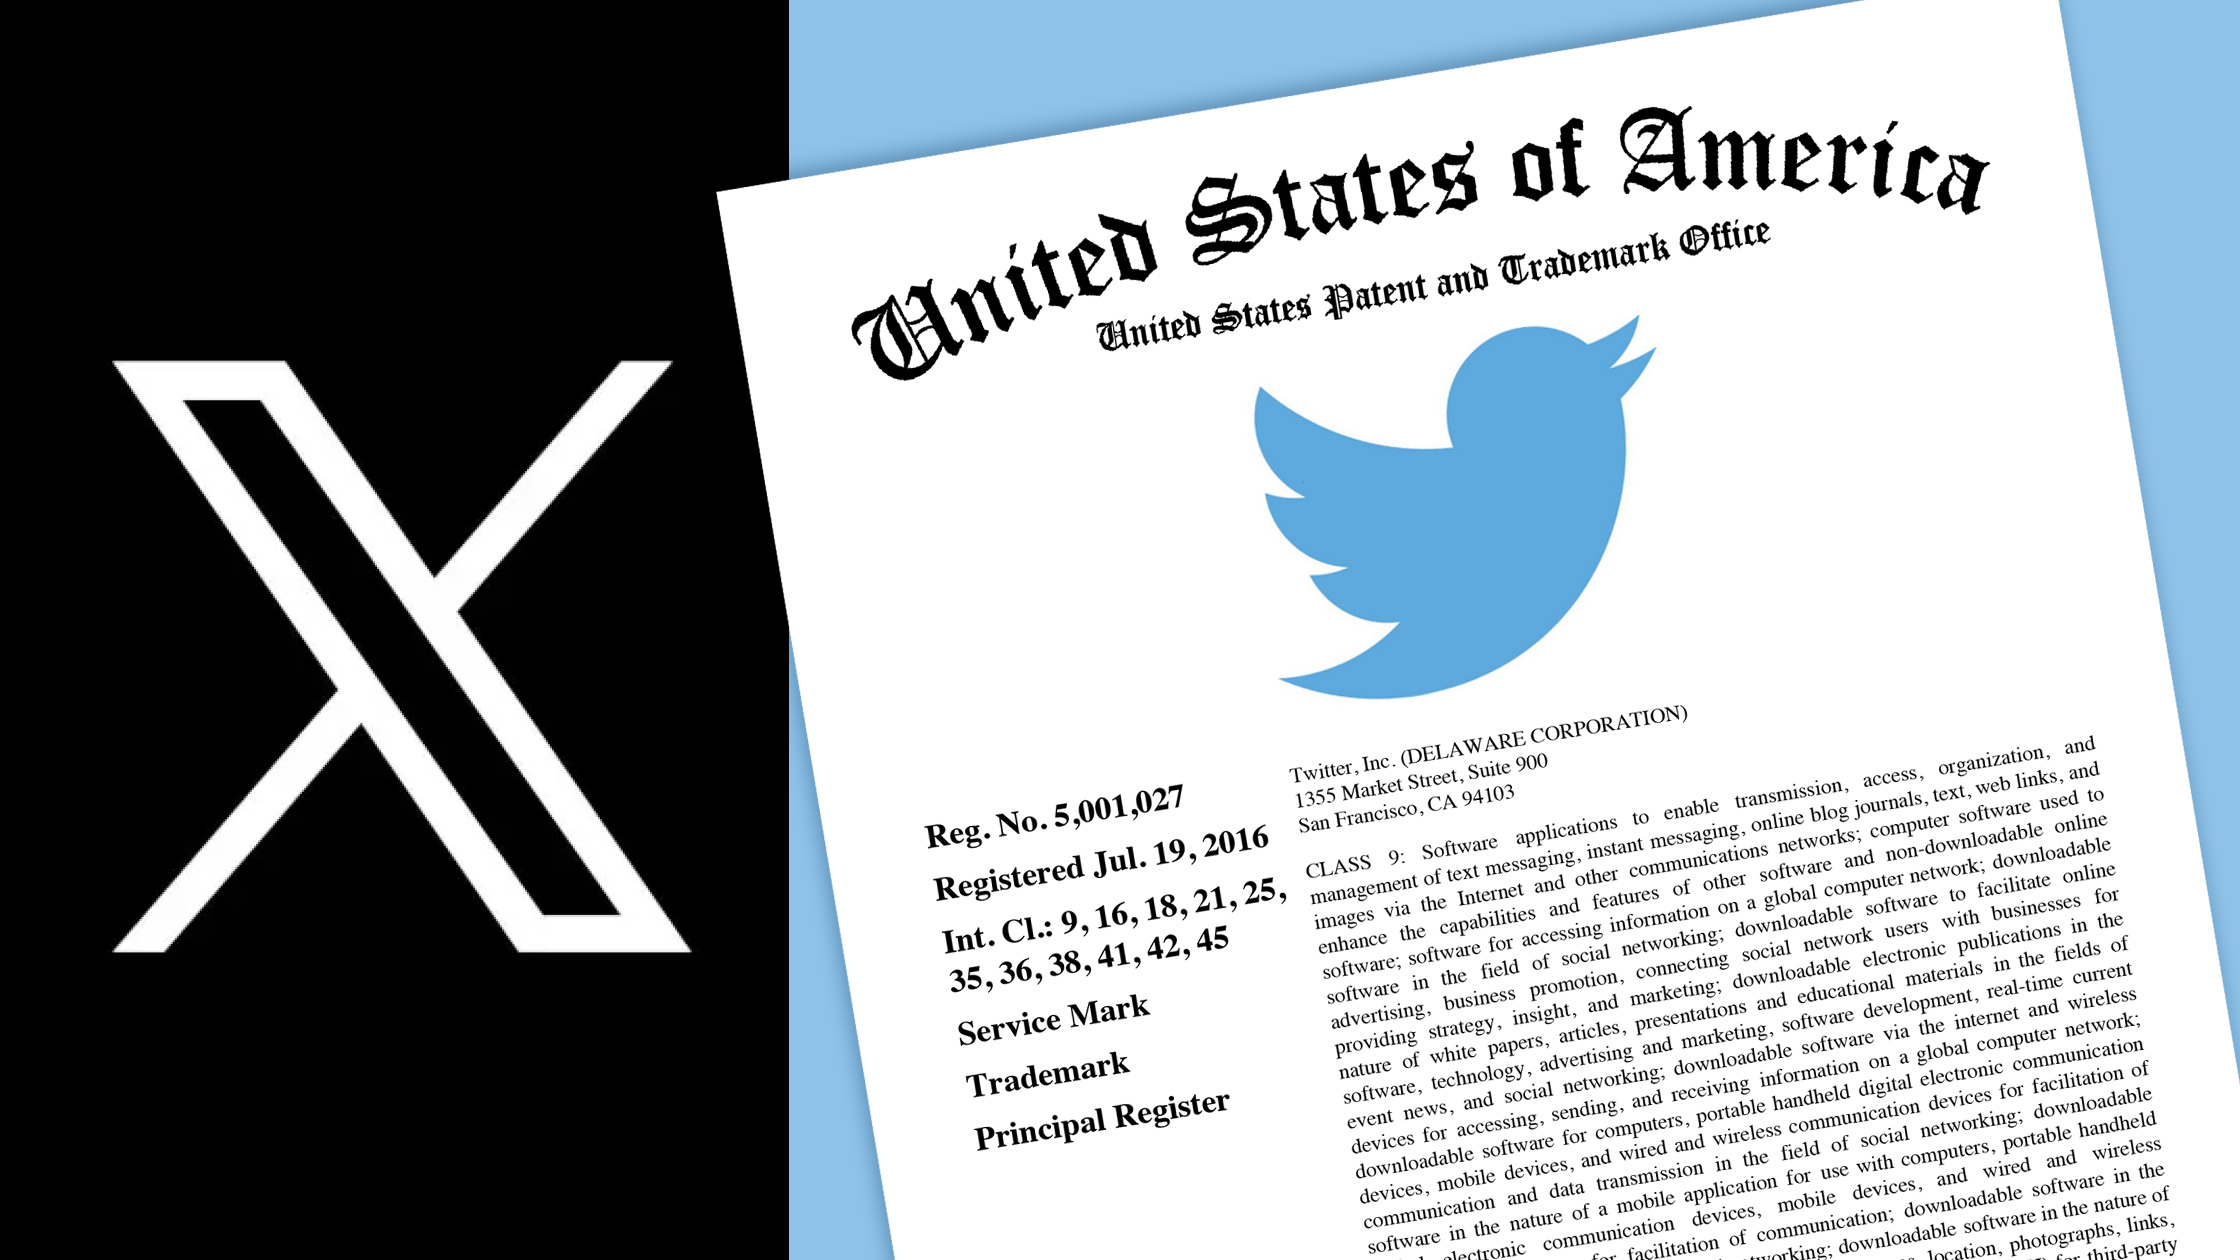 The new X logo and a USPTO trademark registration certificate for Twitter's bird logo.